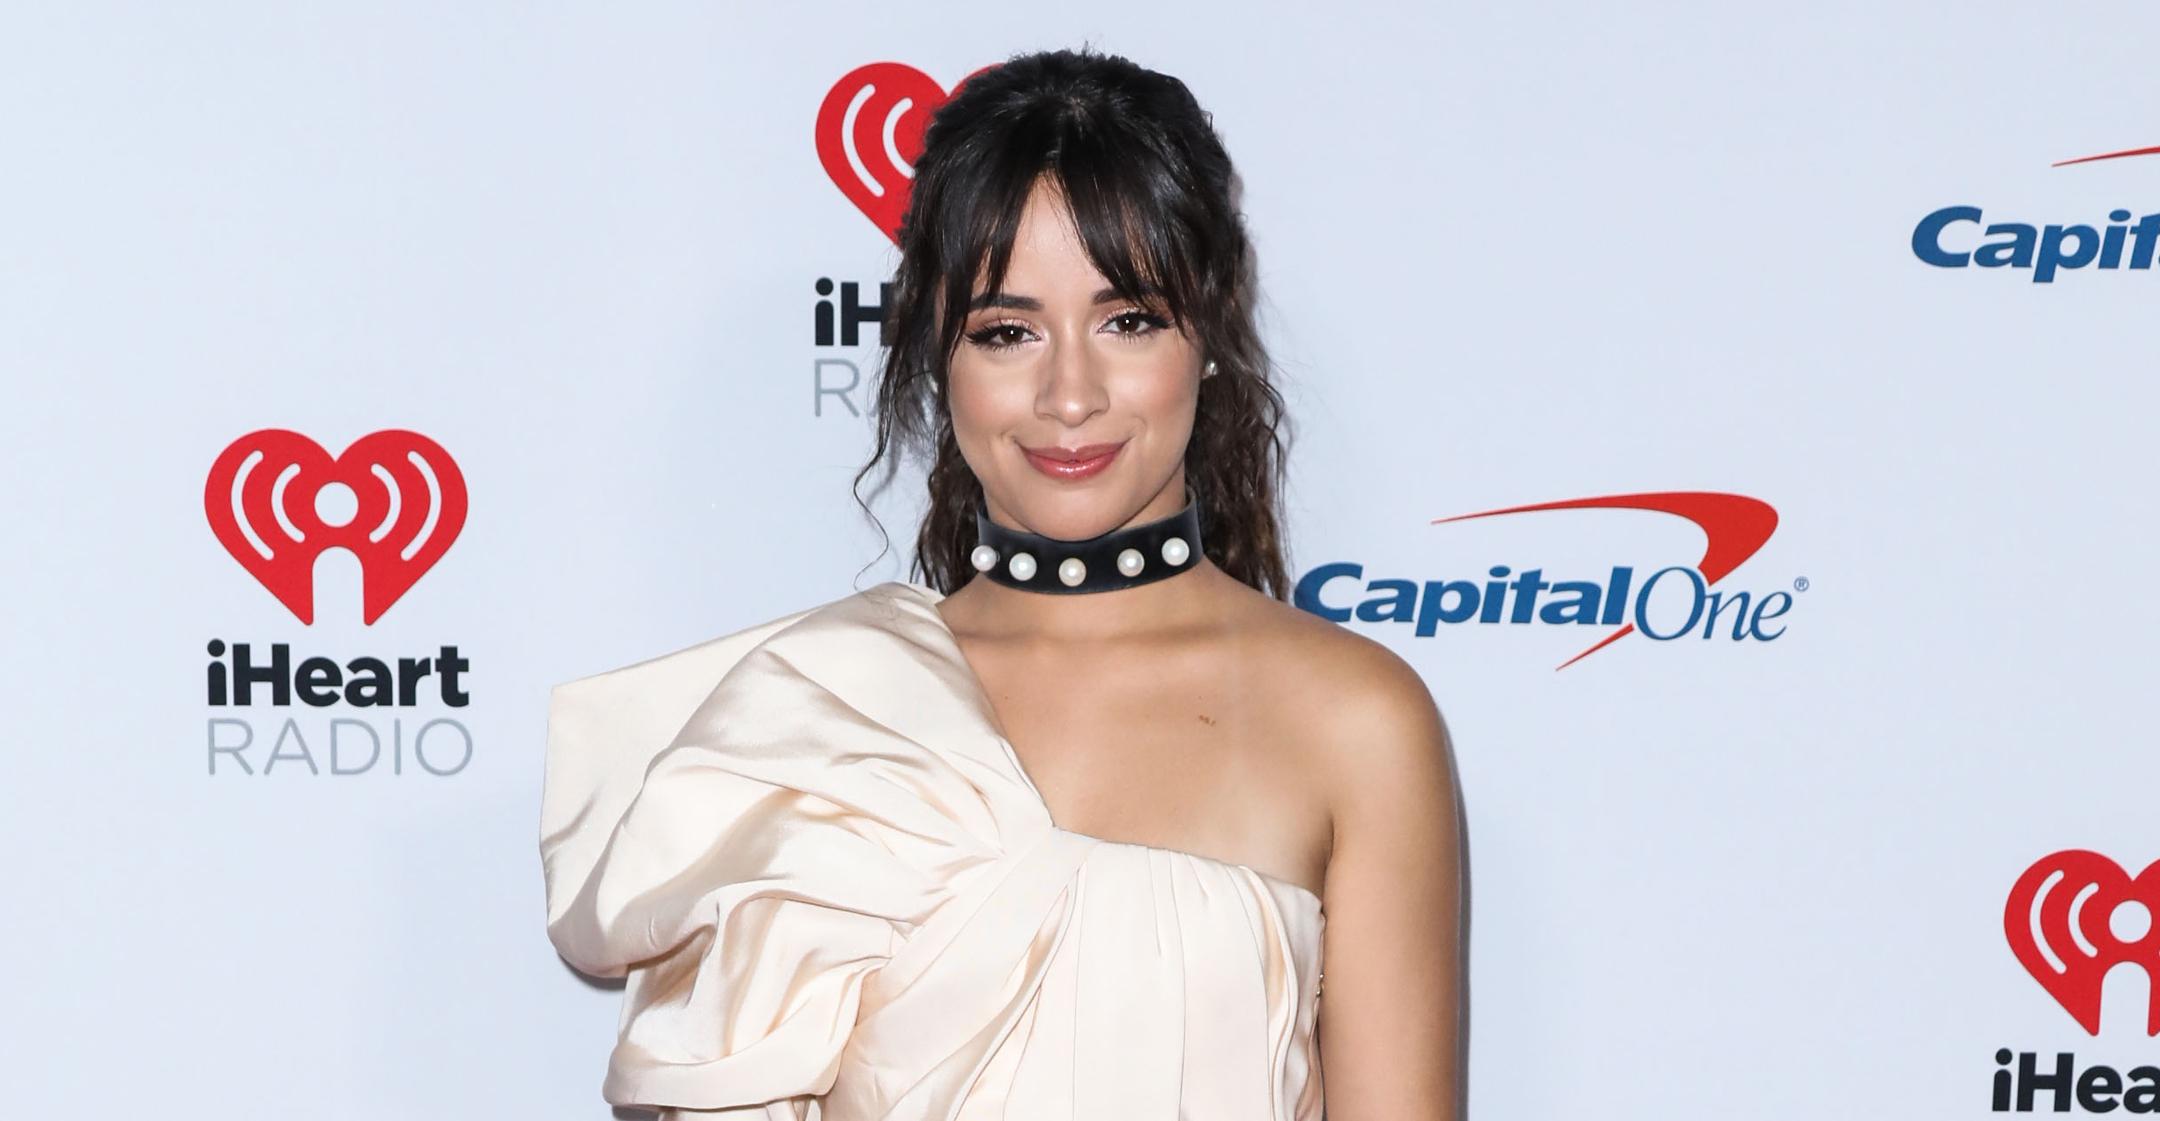 Camila Cabello Says 'Everybody' Can Make a 'Positive Change